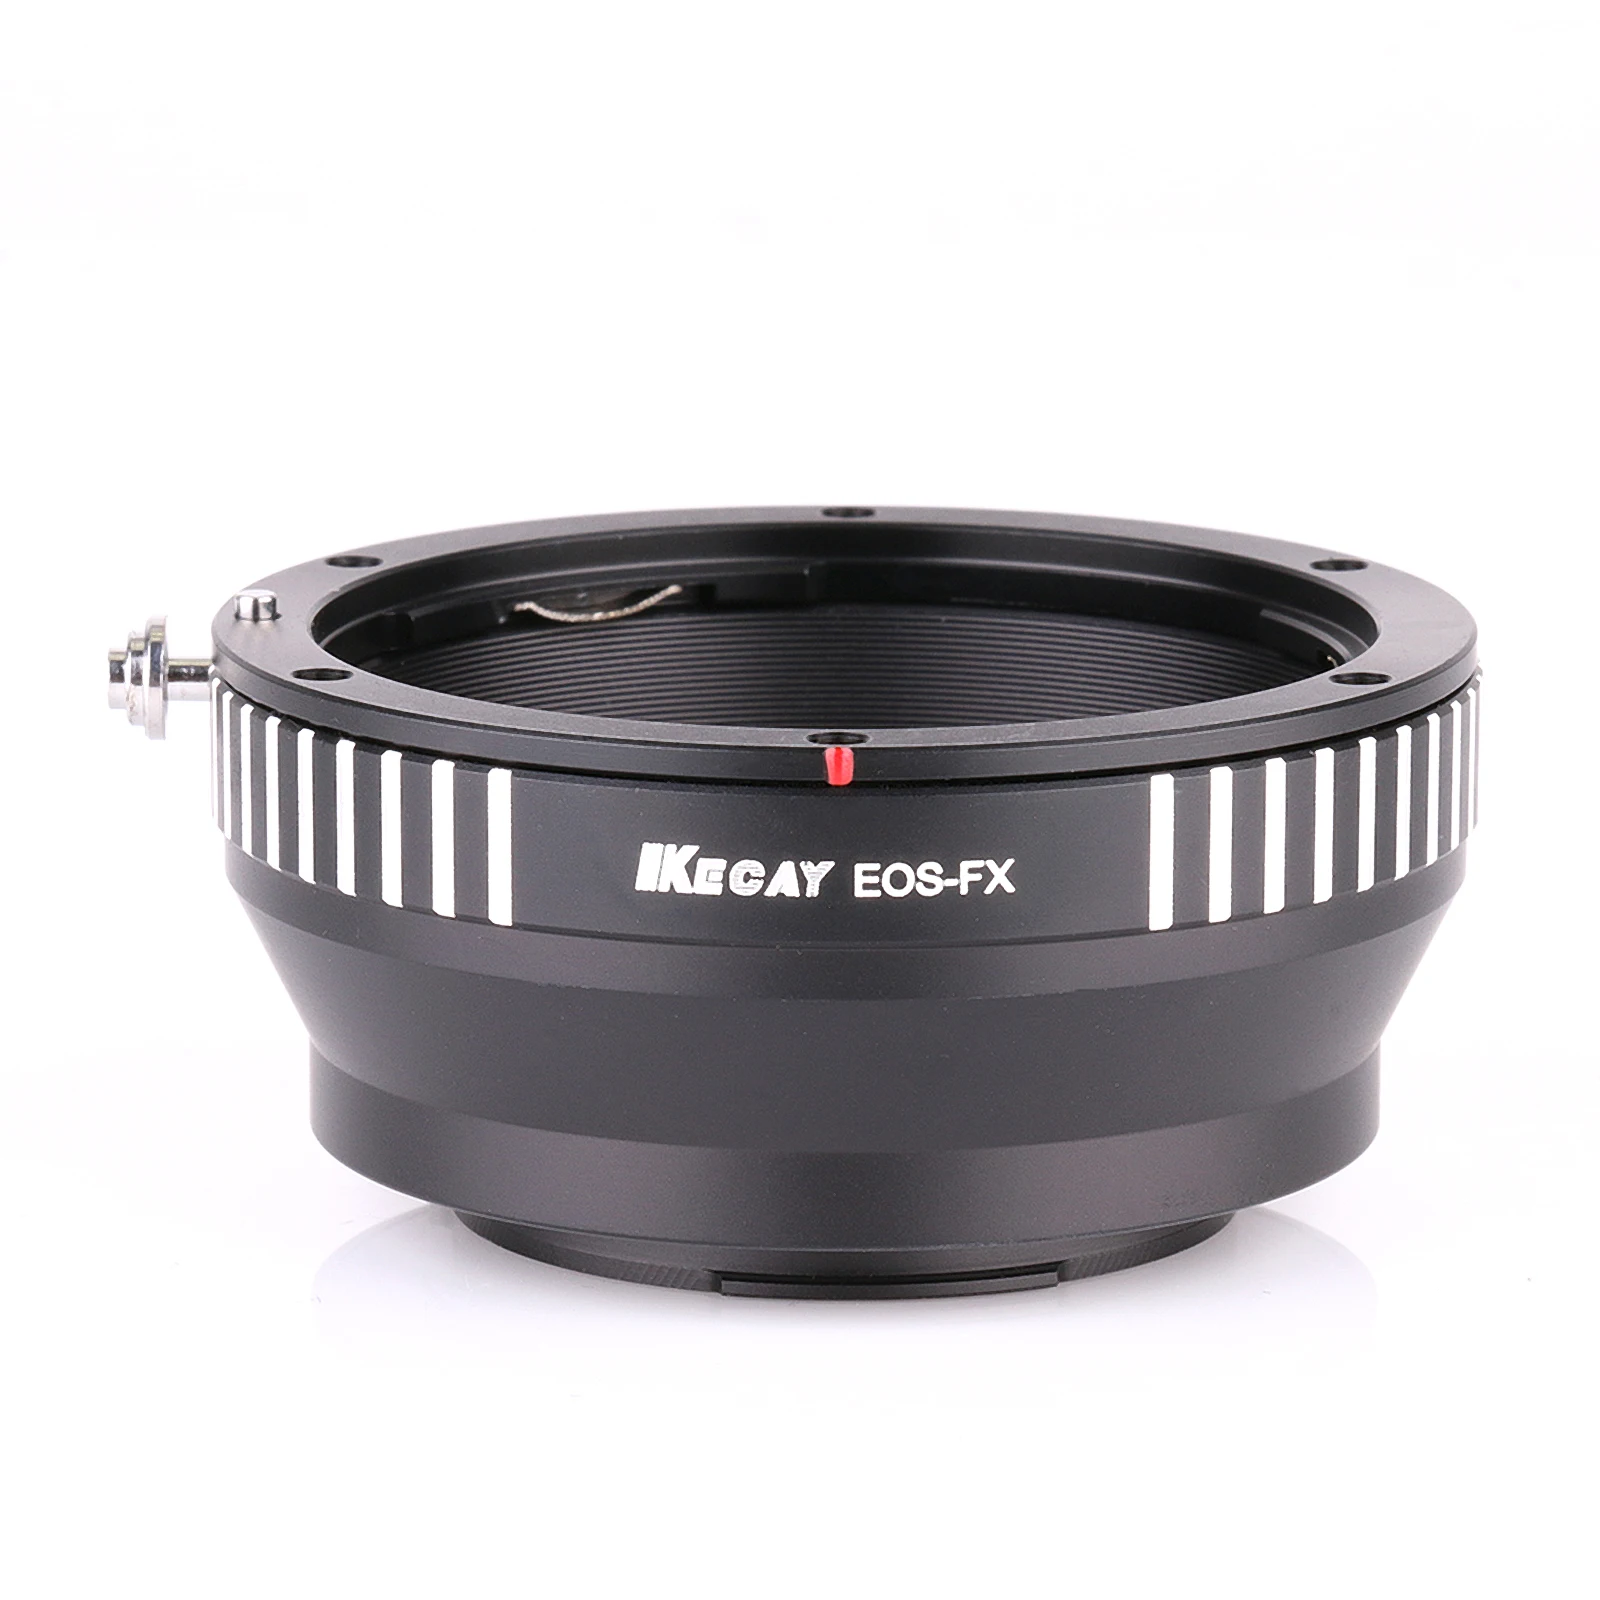 

KECAY EOS-FX Camera Lens Adapter Ring for Canon EOS EF/EFS Mount lens to for Fujifilm X Mount Fuji X-Pro1 XPro1 X